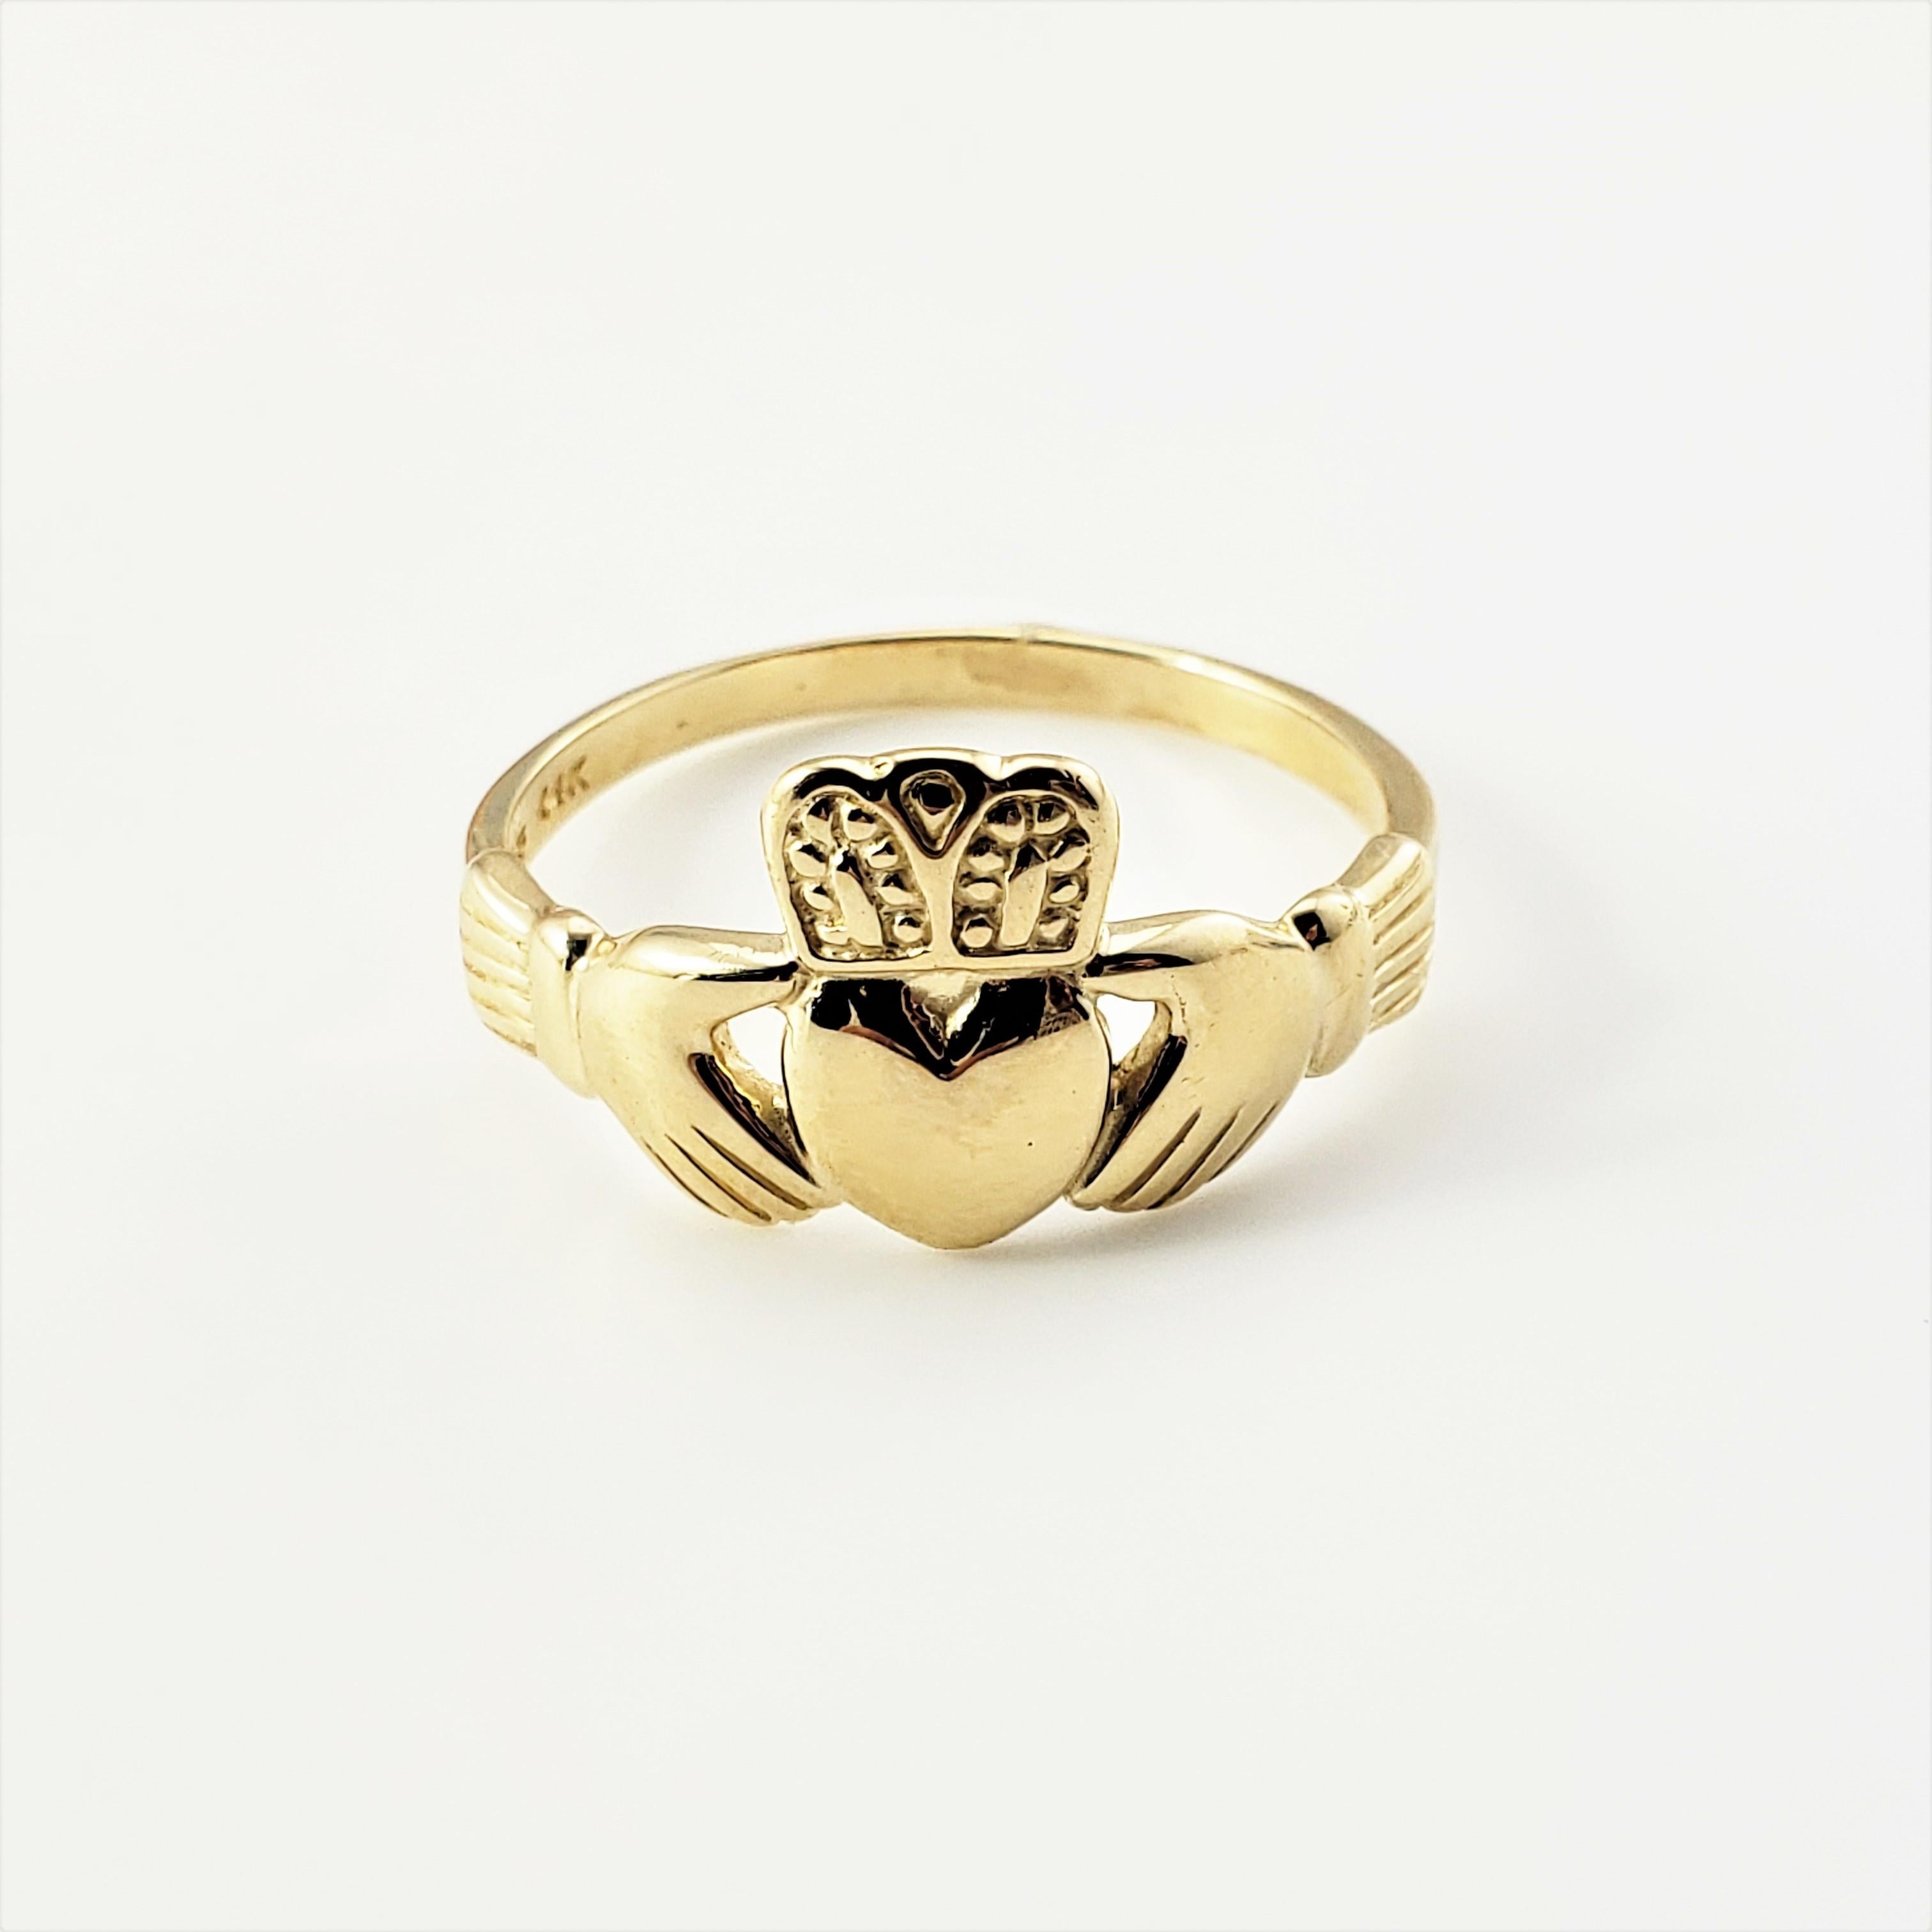 14 Karat Yellow Gold Claddagh Ring Size 10.75-

The traditional Irish Claddagh ring is a symbol of friendship, love and loyalty.  Beautifully detailed in 14K yellow gold.  Width: 12 mm.
Shank:  2 mm.

Ring Size: 10.75

Weight:  2.5 dwt. /  4.0